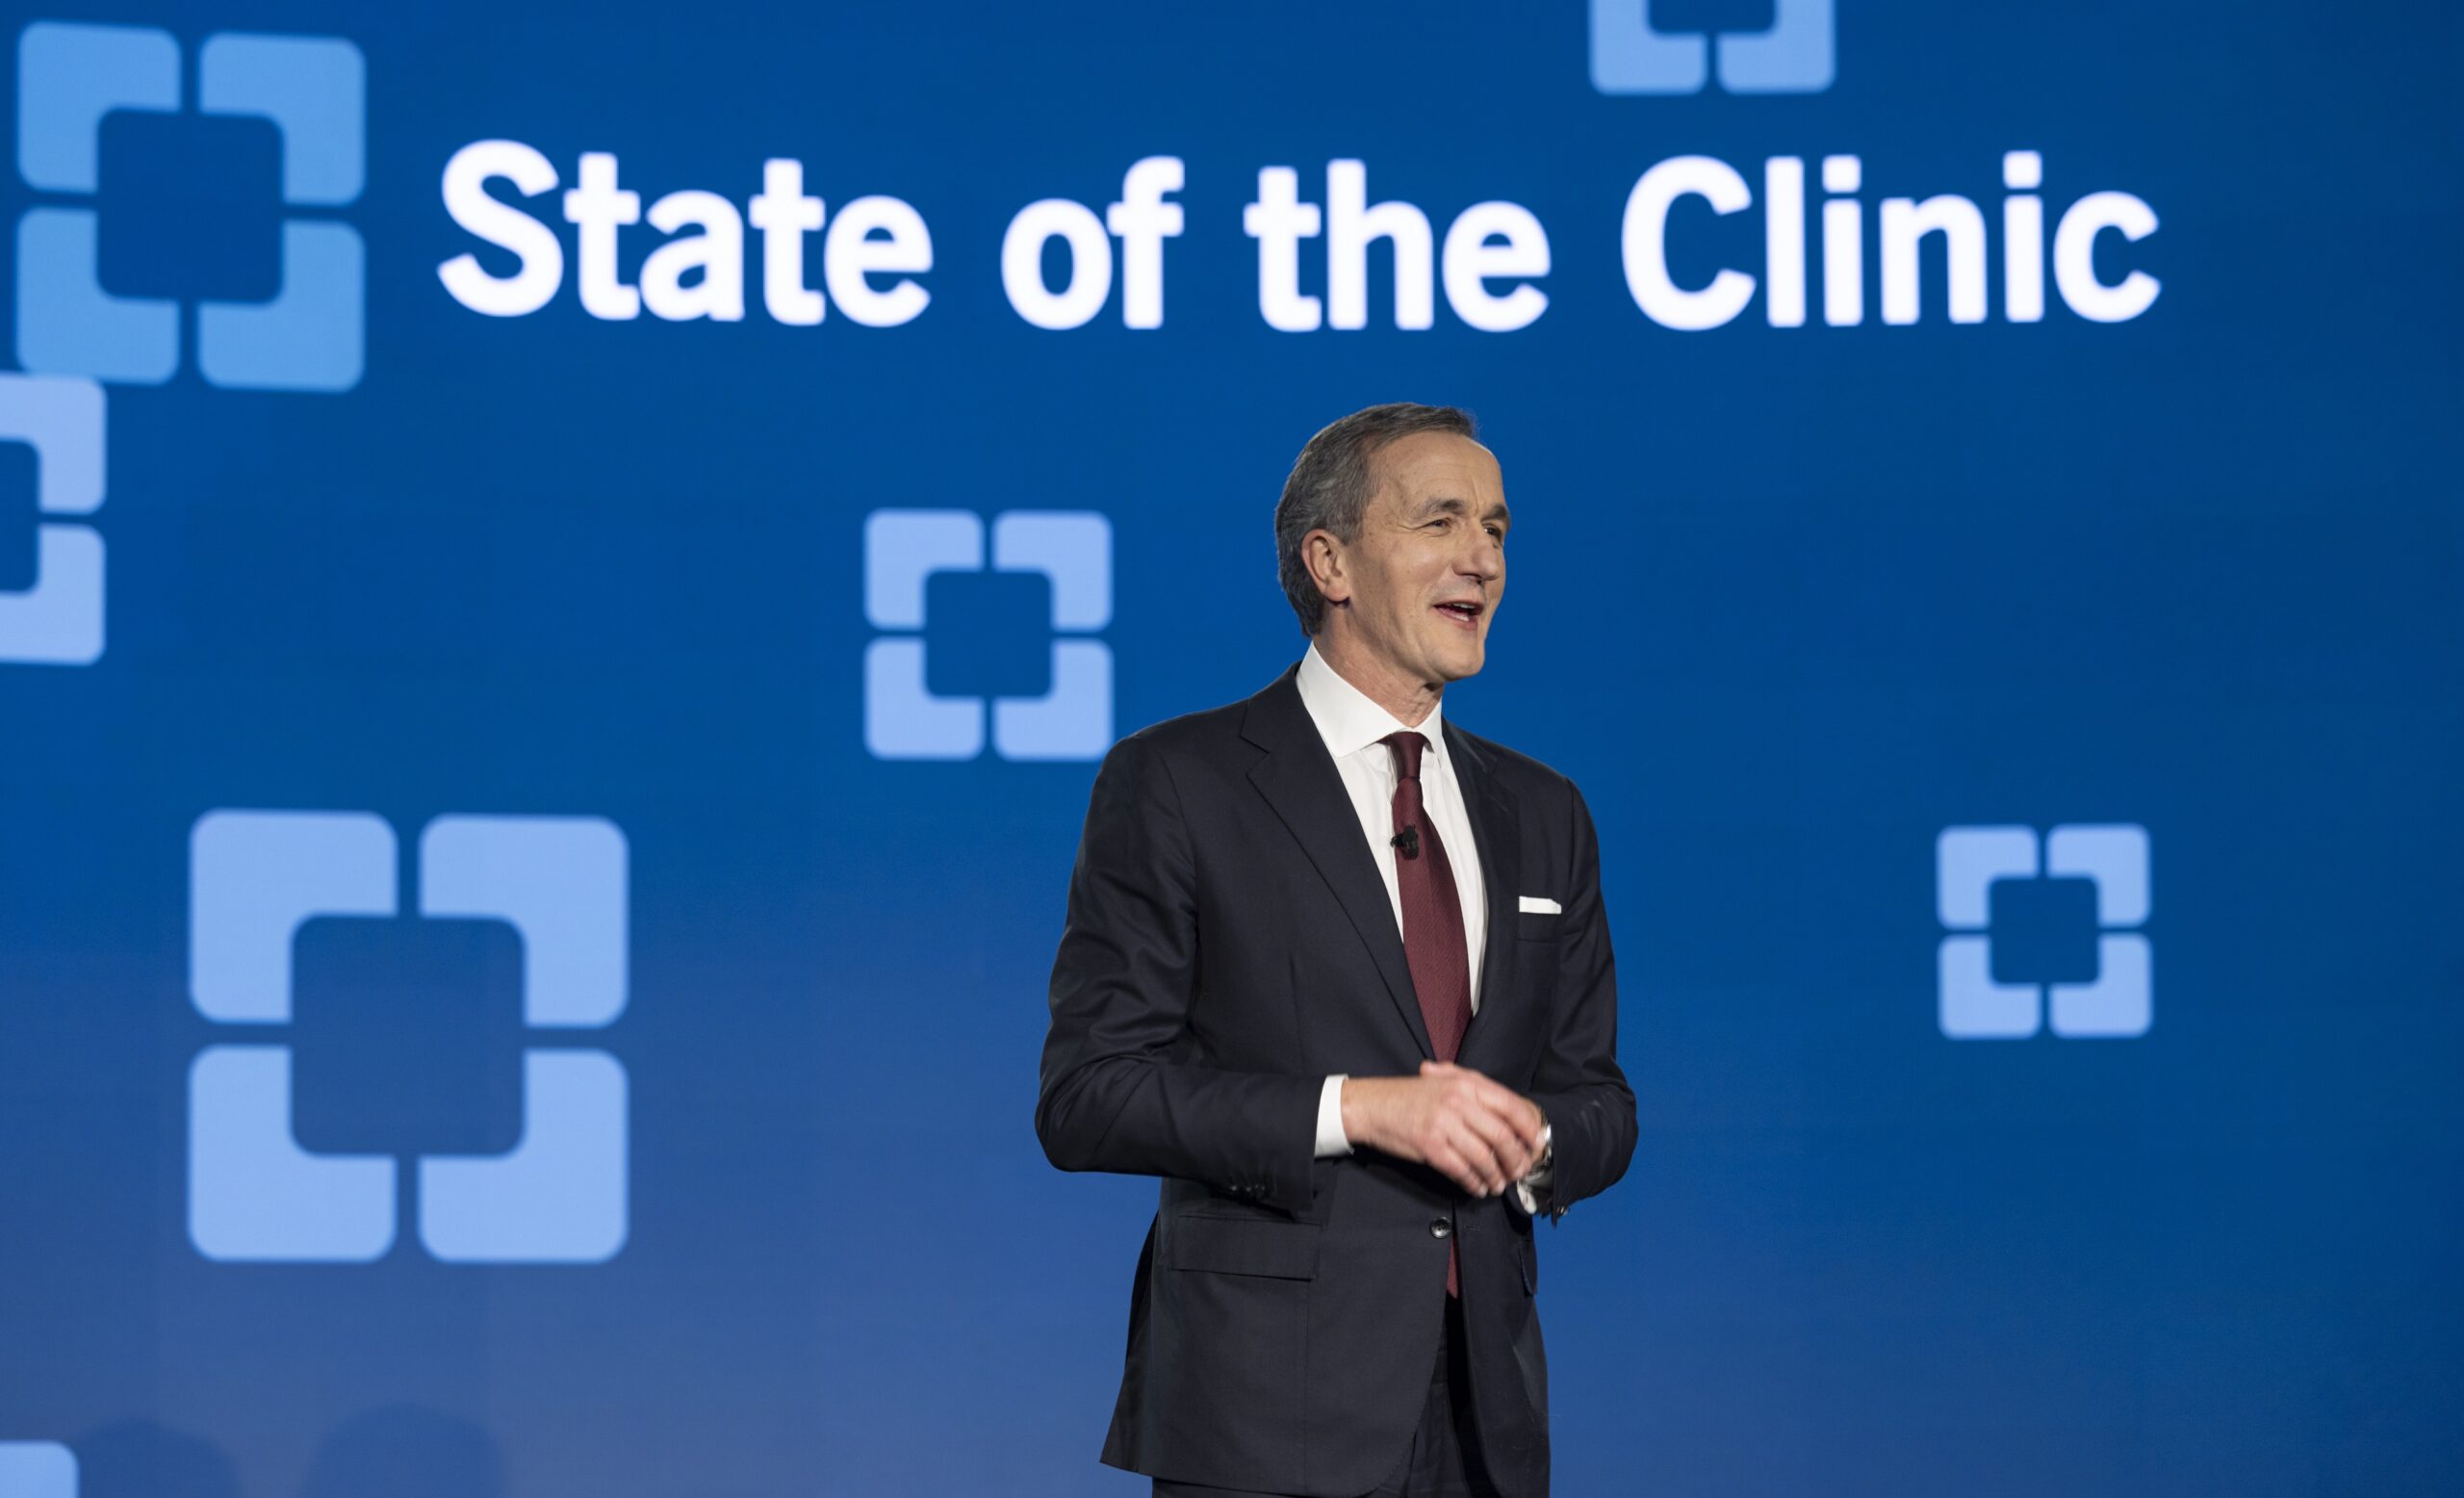 Cleveland Clinic CEO and President Tom Mihaljevic MD